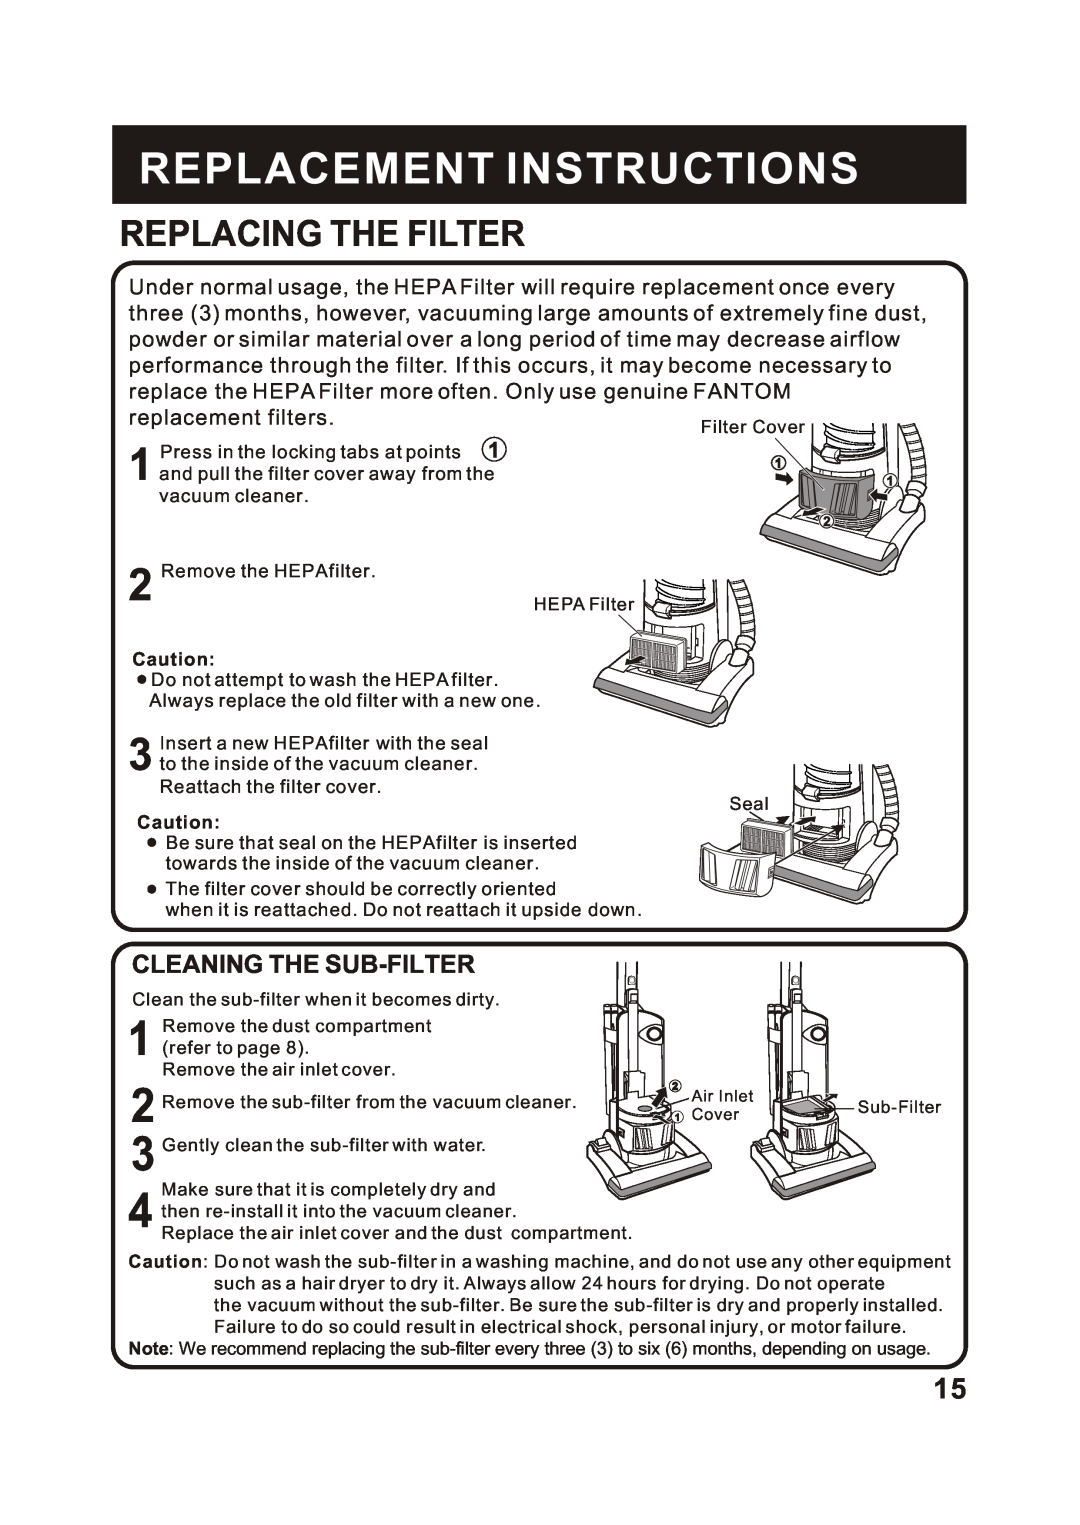 Fantom Vacuum FM655CS instruction manual Replacing The Filter, Cleaning The Sub-Filter, Replacement Instructions 